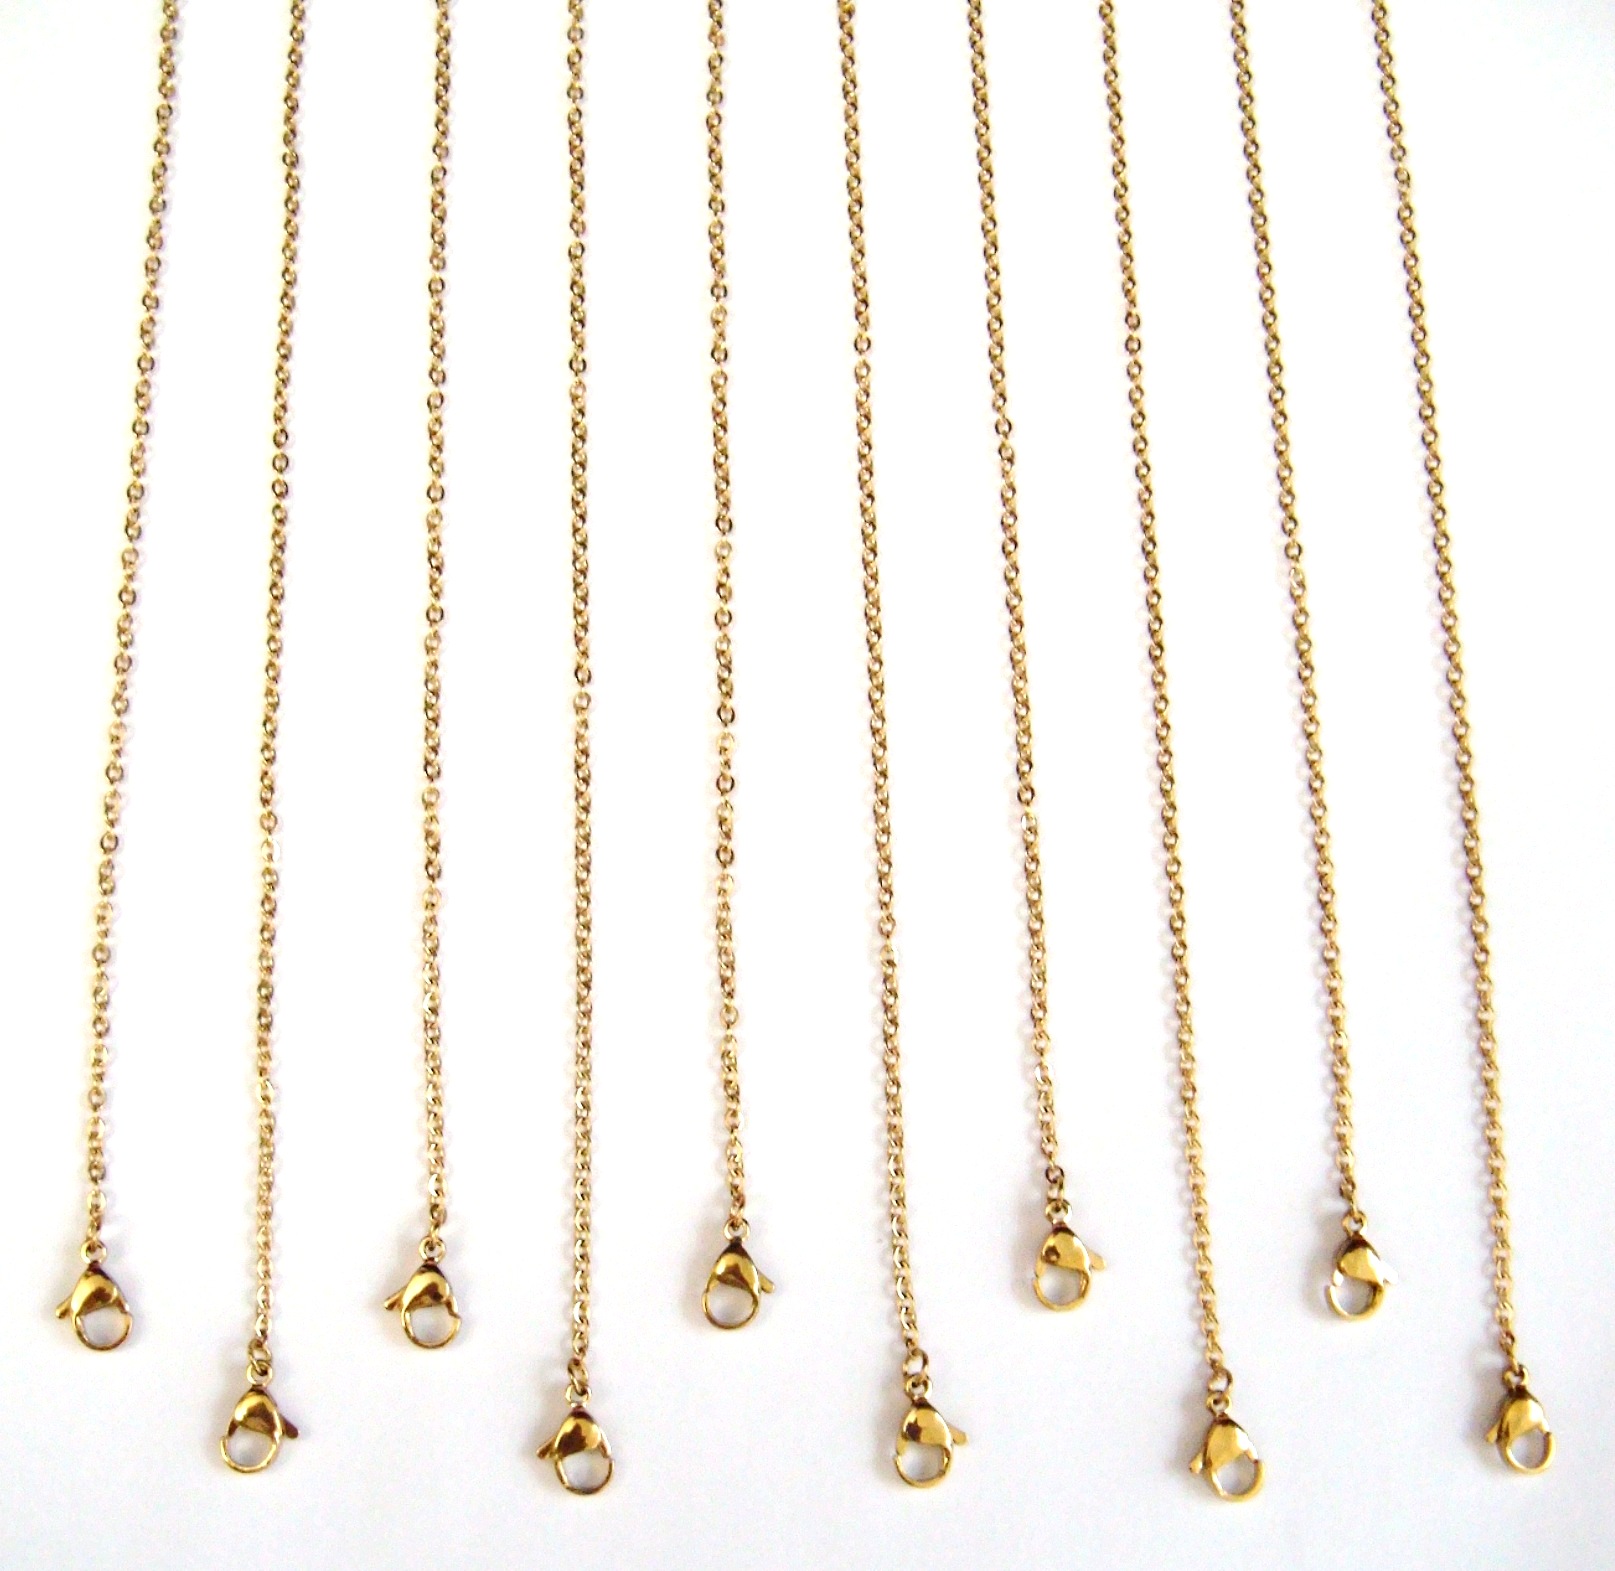 10 PC. Gold Electro Plated 2mm Curb Stainless Steel Chains